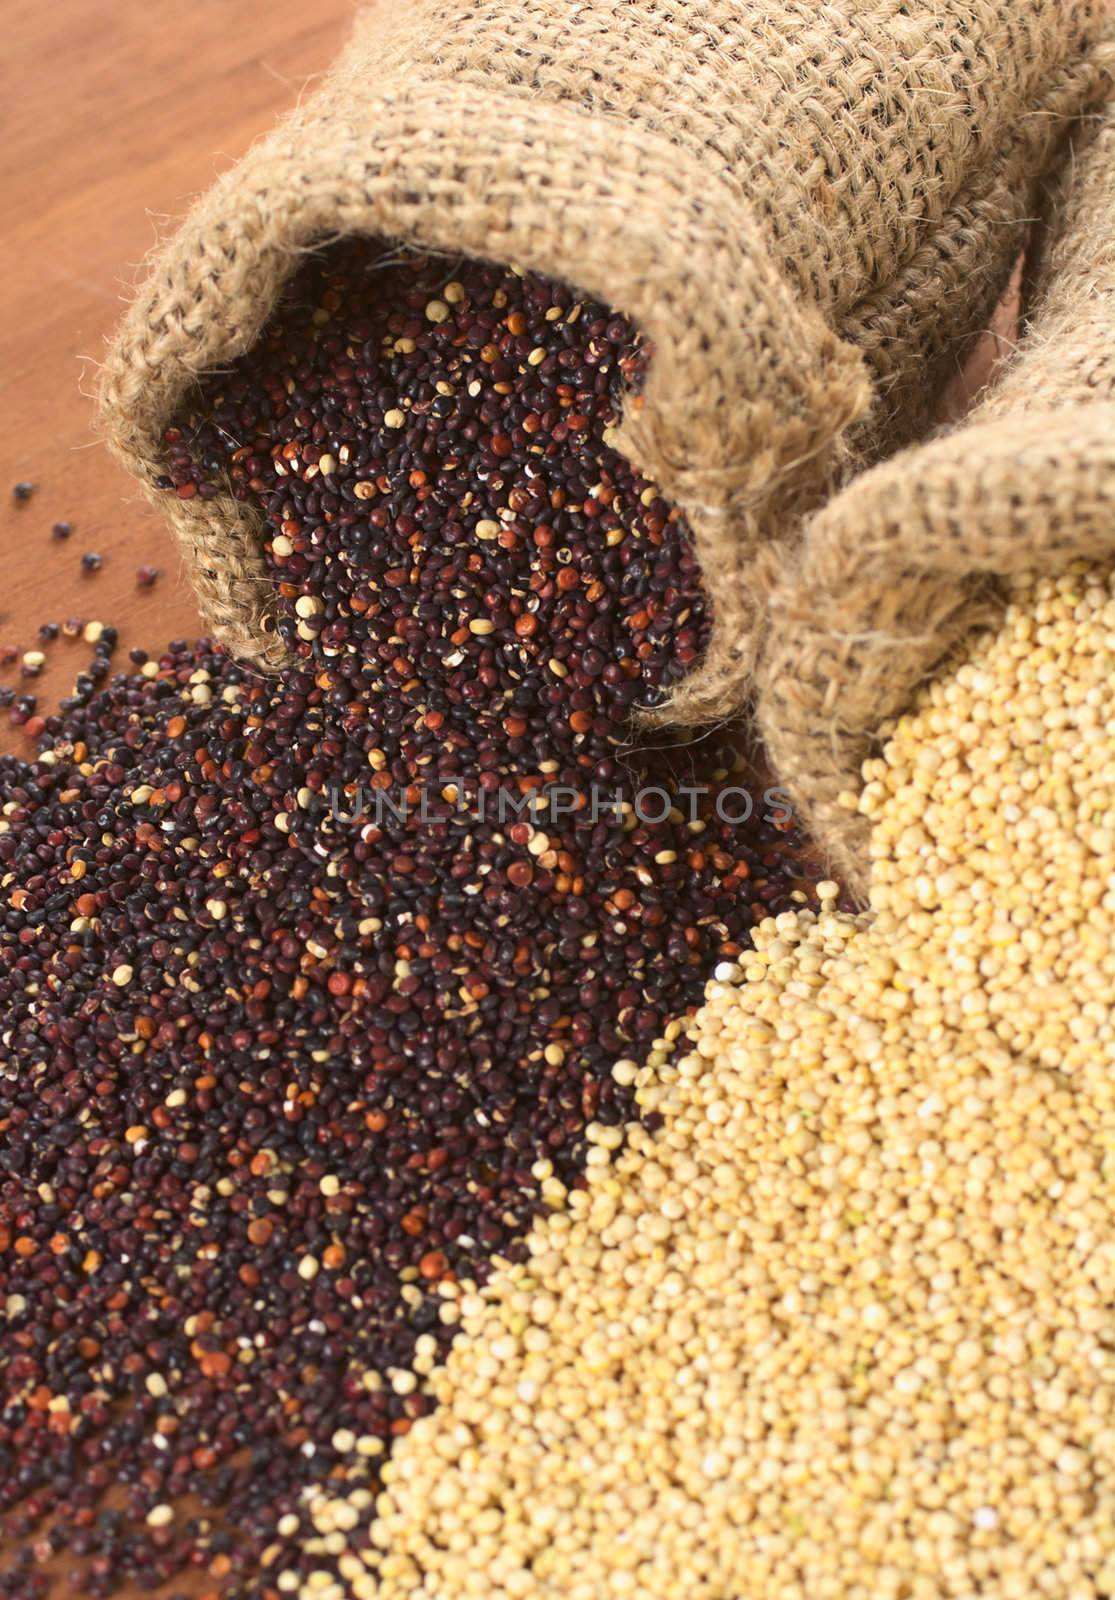 Raw red and white quinoa grains in jute sack on wood. Quinoa is grown in the Andes region  and has a high protein content and a high nutritional value (Selective Focus, Focus on the red quinoa grains at the sack opening)